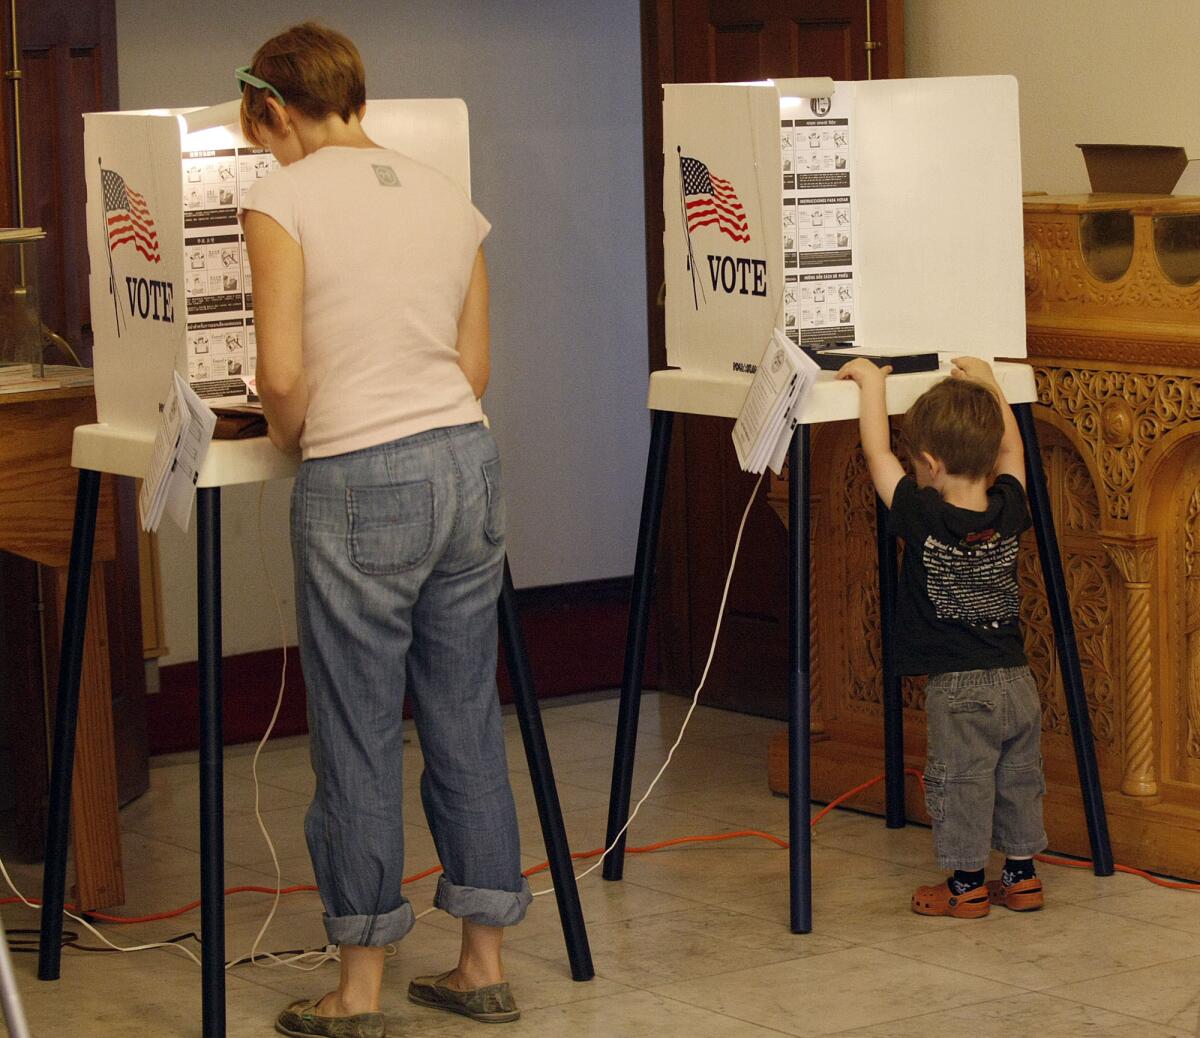 A mom gives her son a preview of the voting process during the Los Angeles municipal primary election on May 21, 2013.